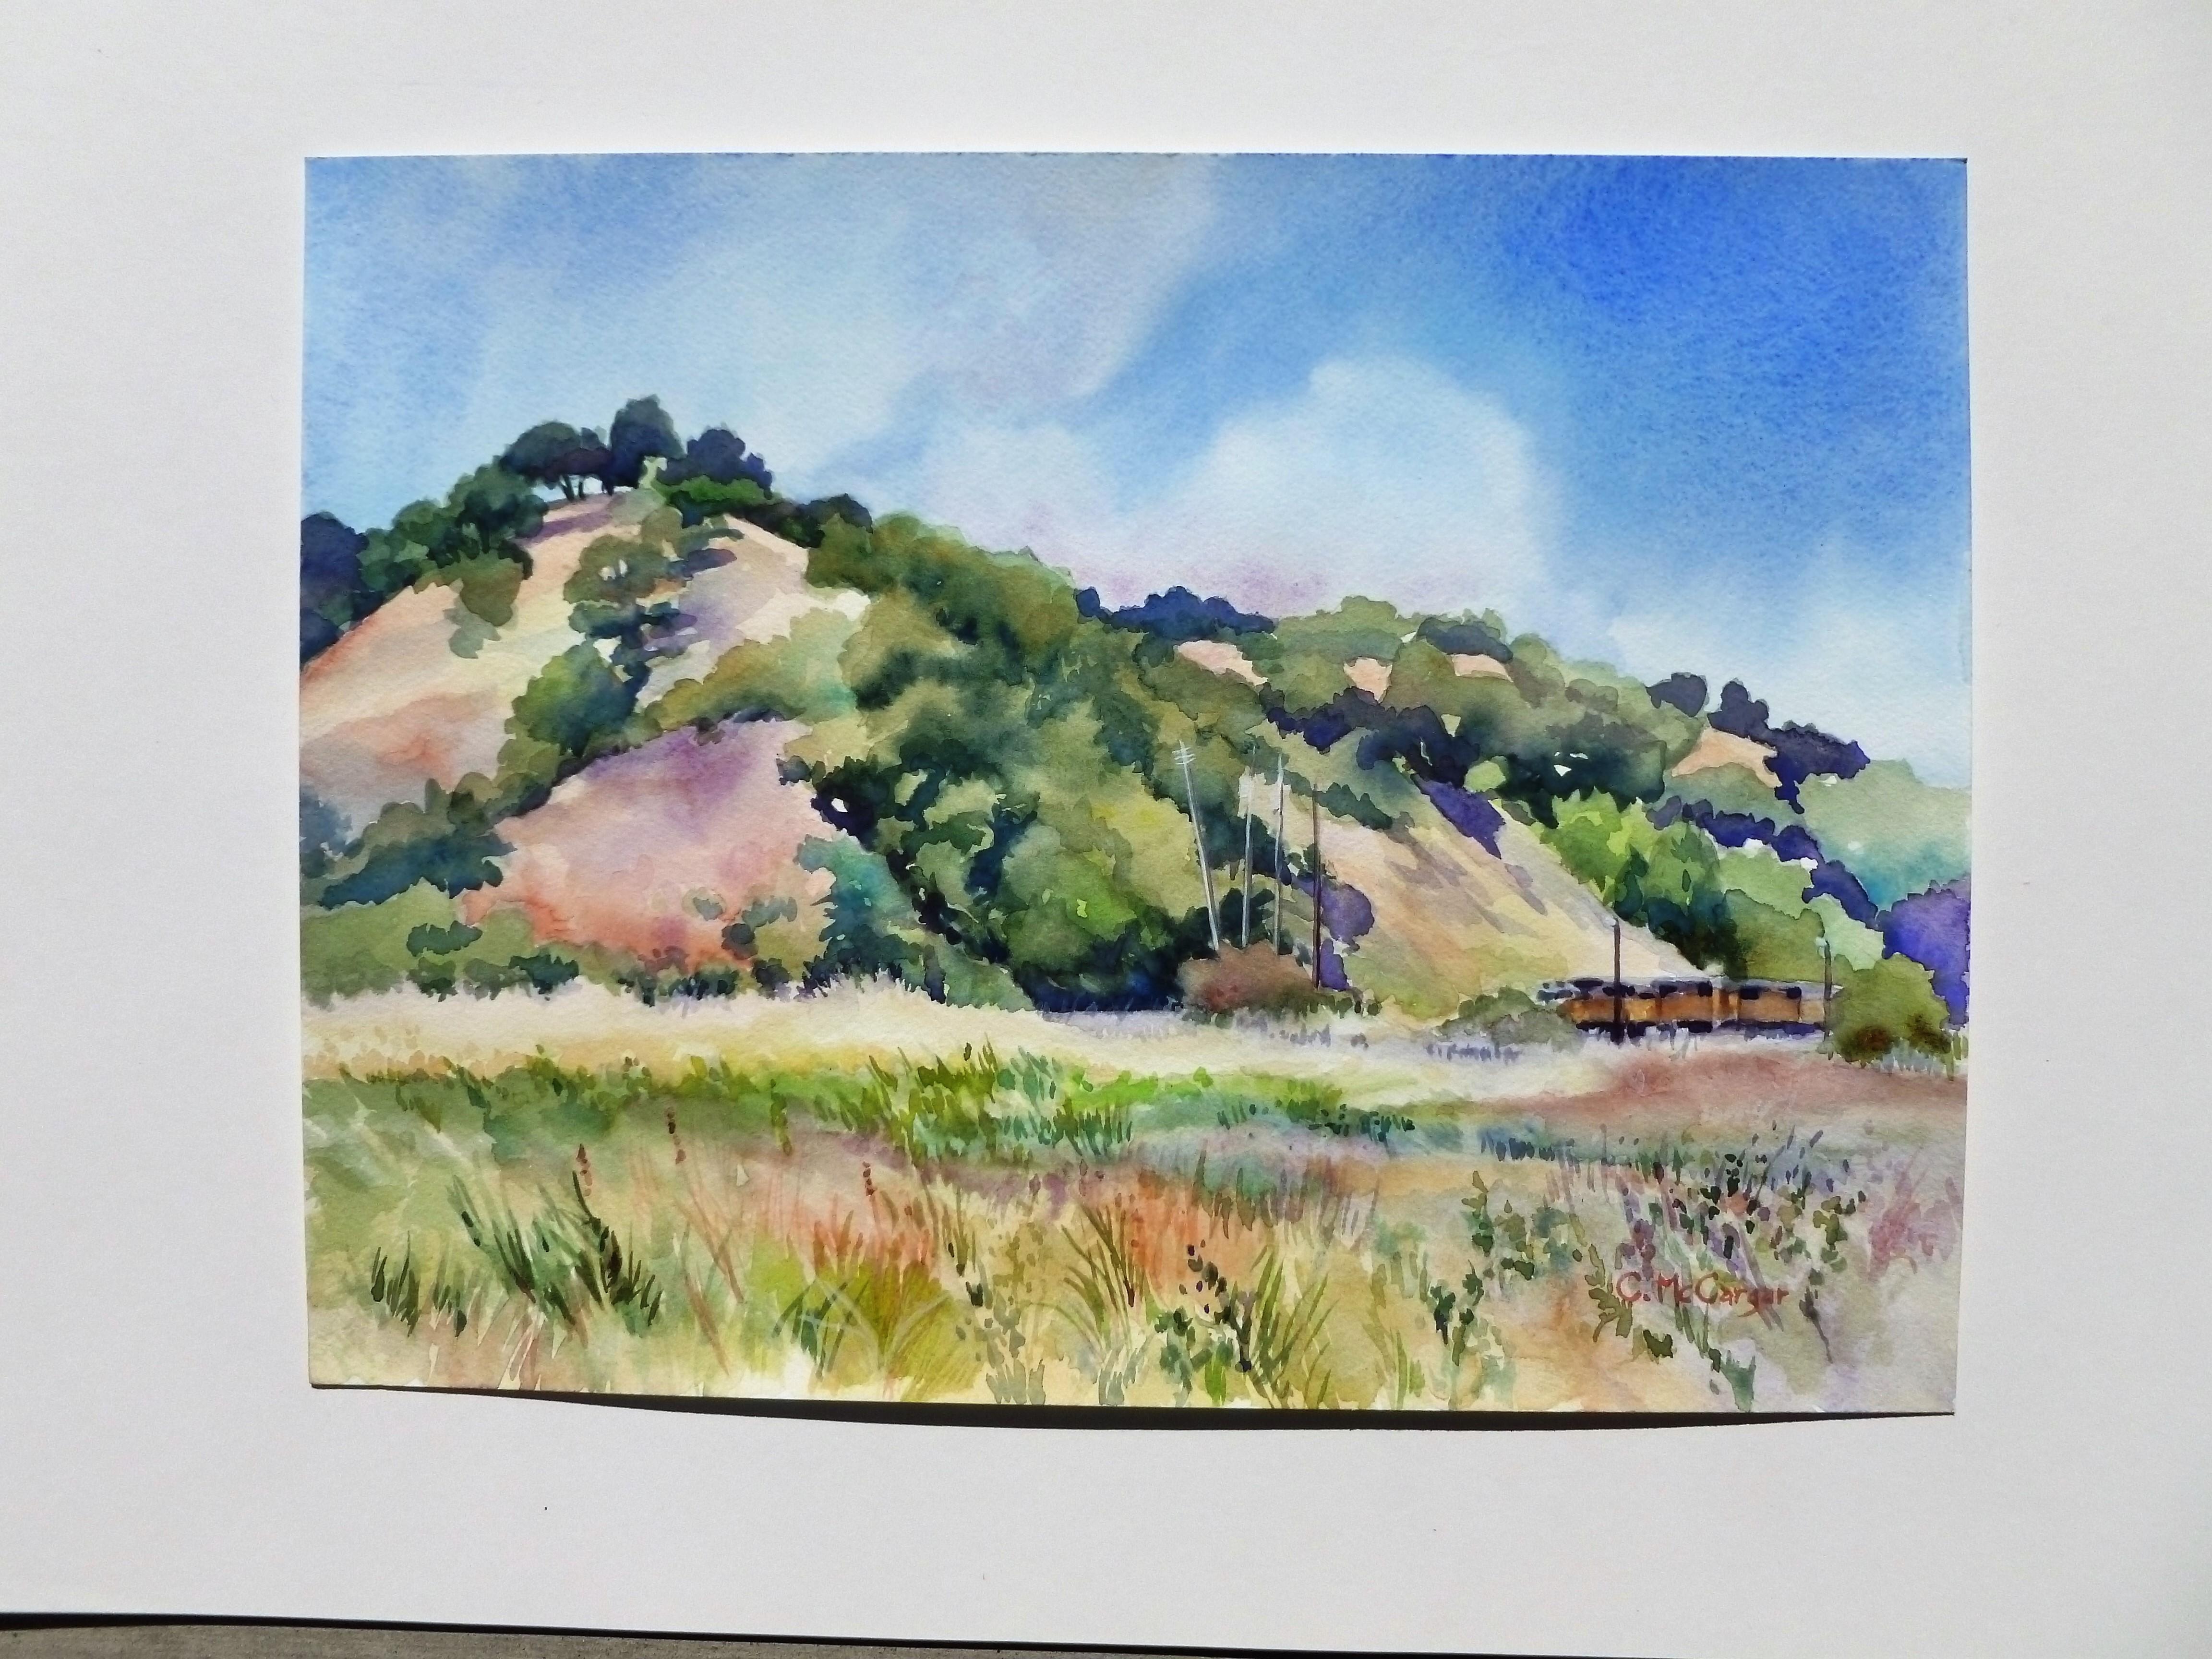 <p>Artist Comments<br />This is a painting done en plein air, and is my impression of shoreline grasses and distant hills, with the intrigue of a train coming through and just in view.</p><p>About the Artist<br />Catherine McCargar created her first